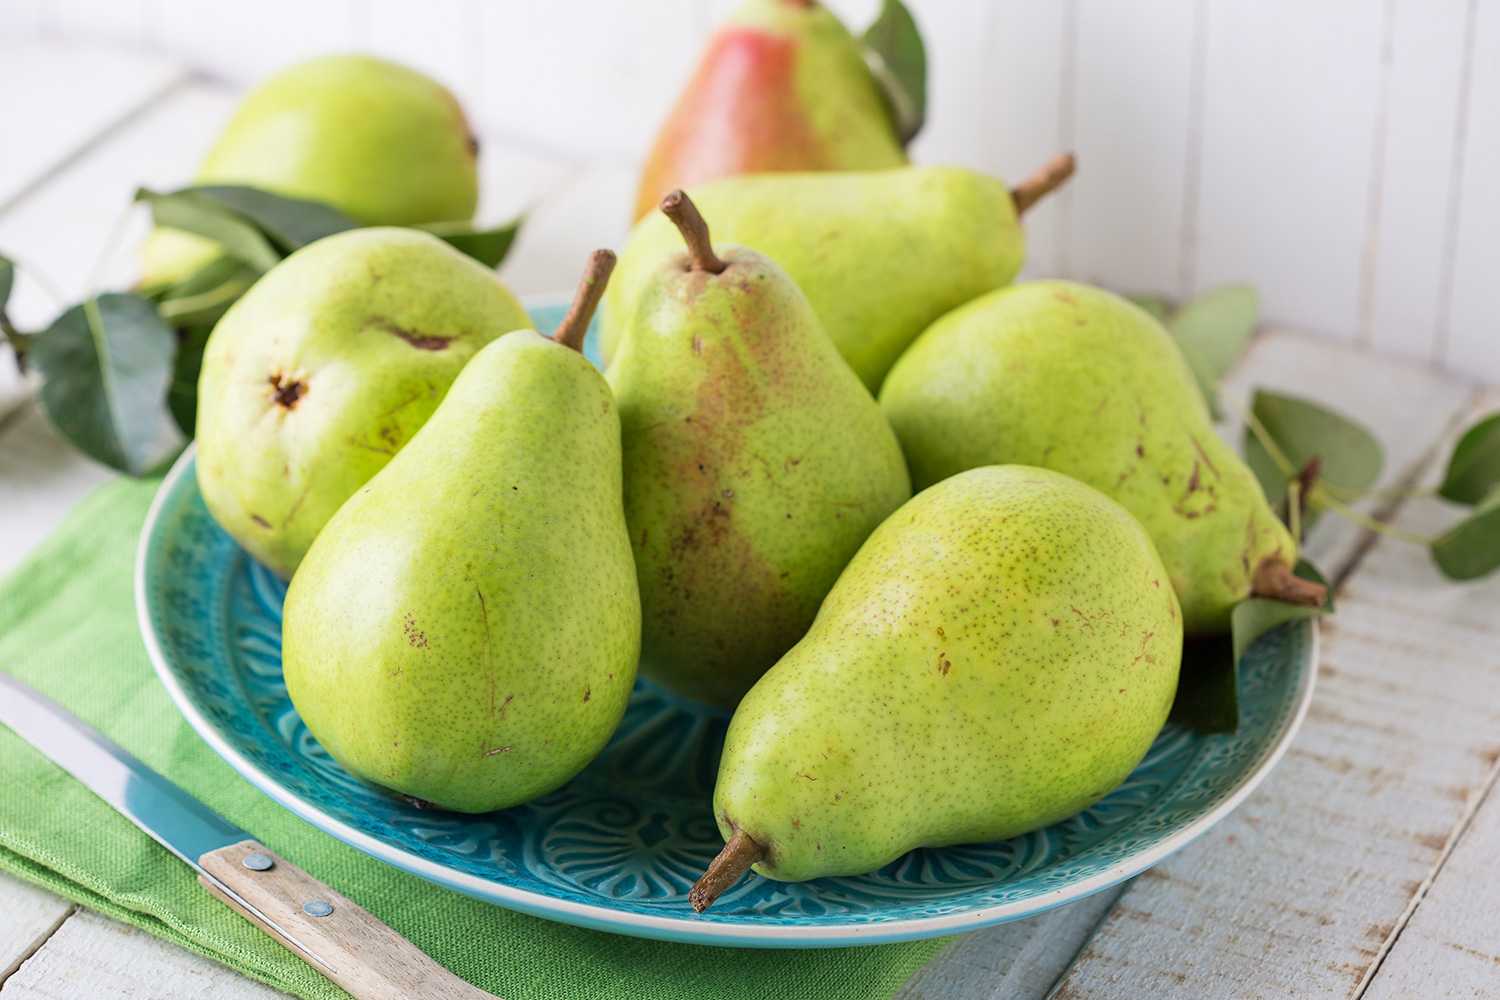 pears on a plate